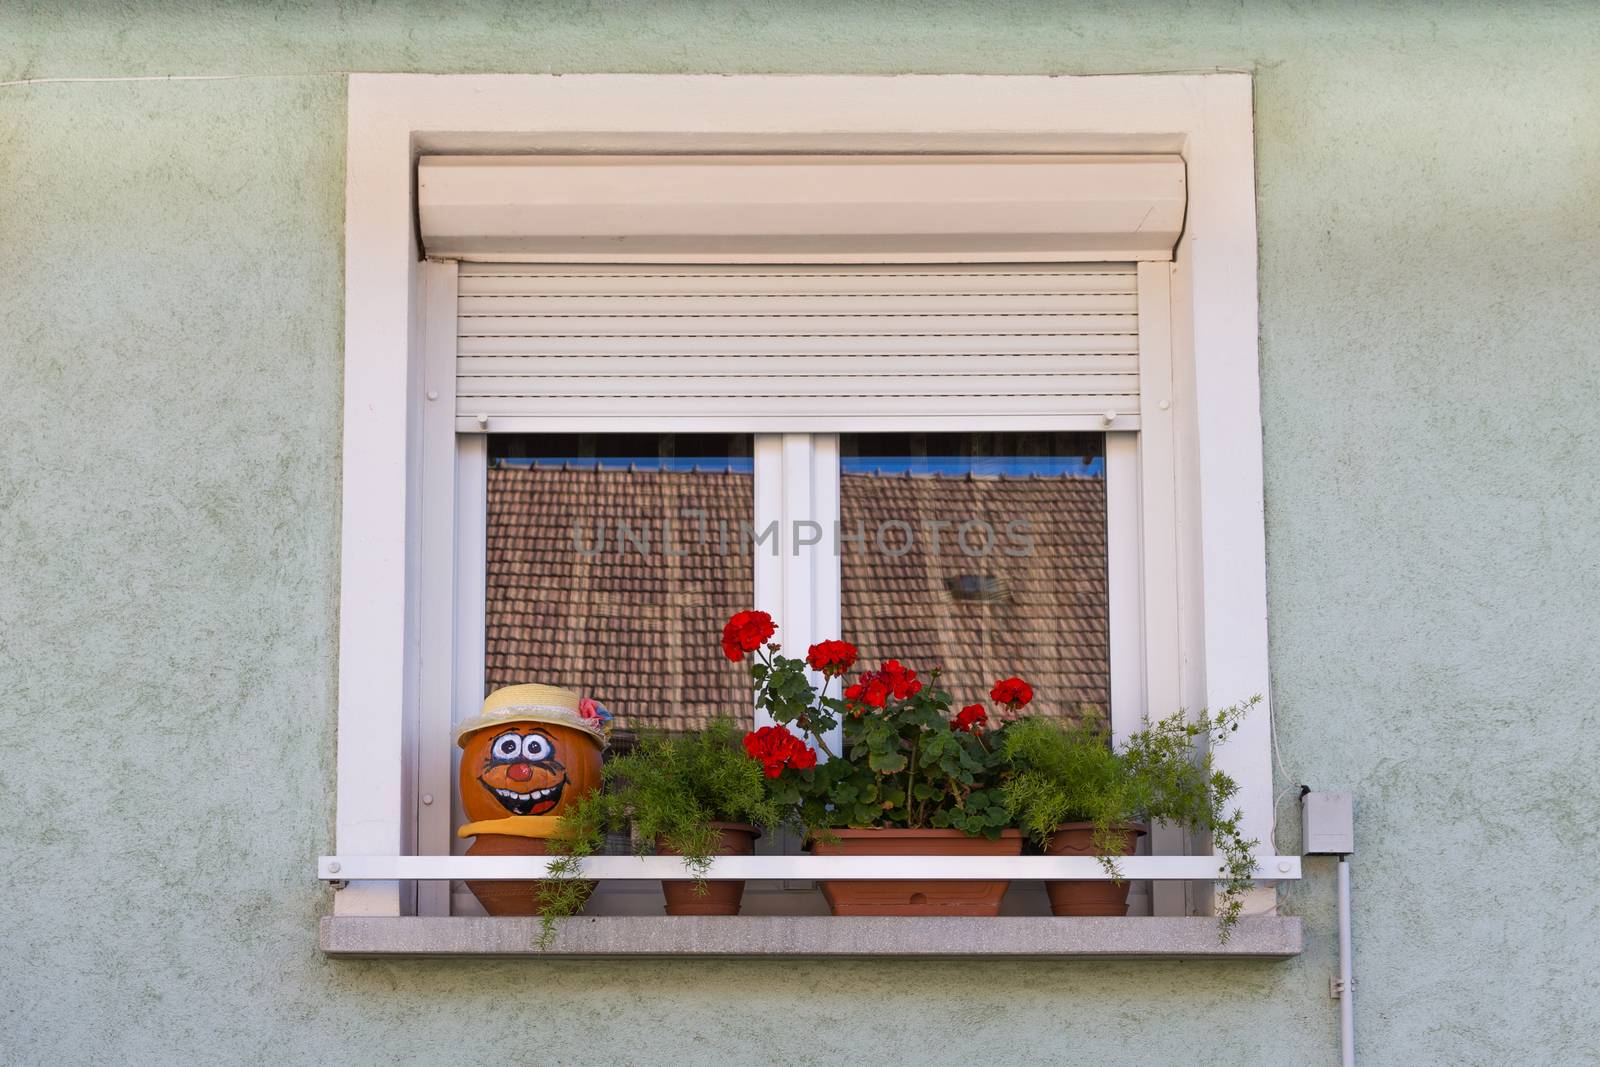 Window. Flowers on the window. Face of pumpkin on a windowsill. A window with shutters. The window of a private house. by AndrewBu